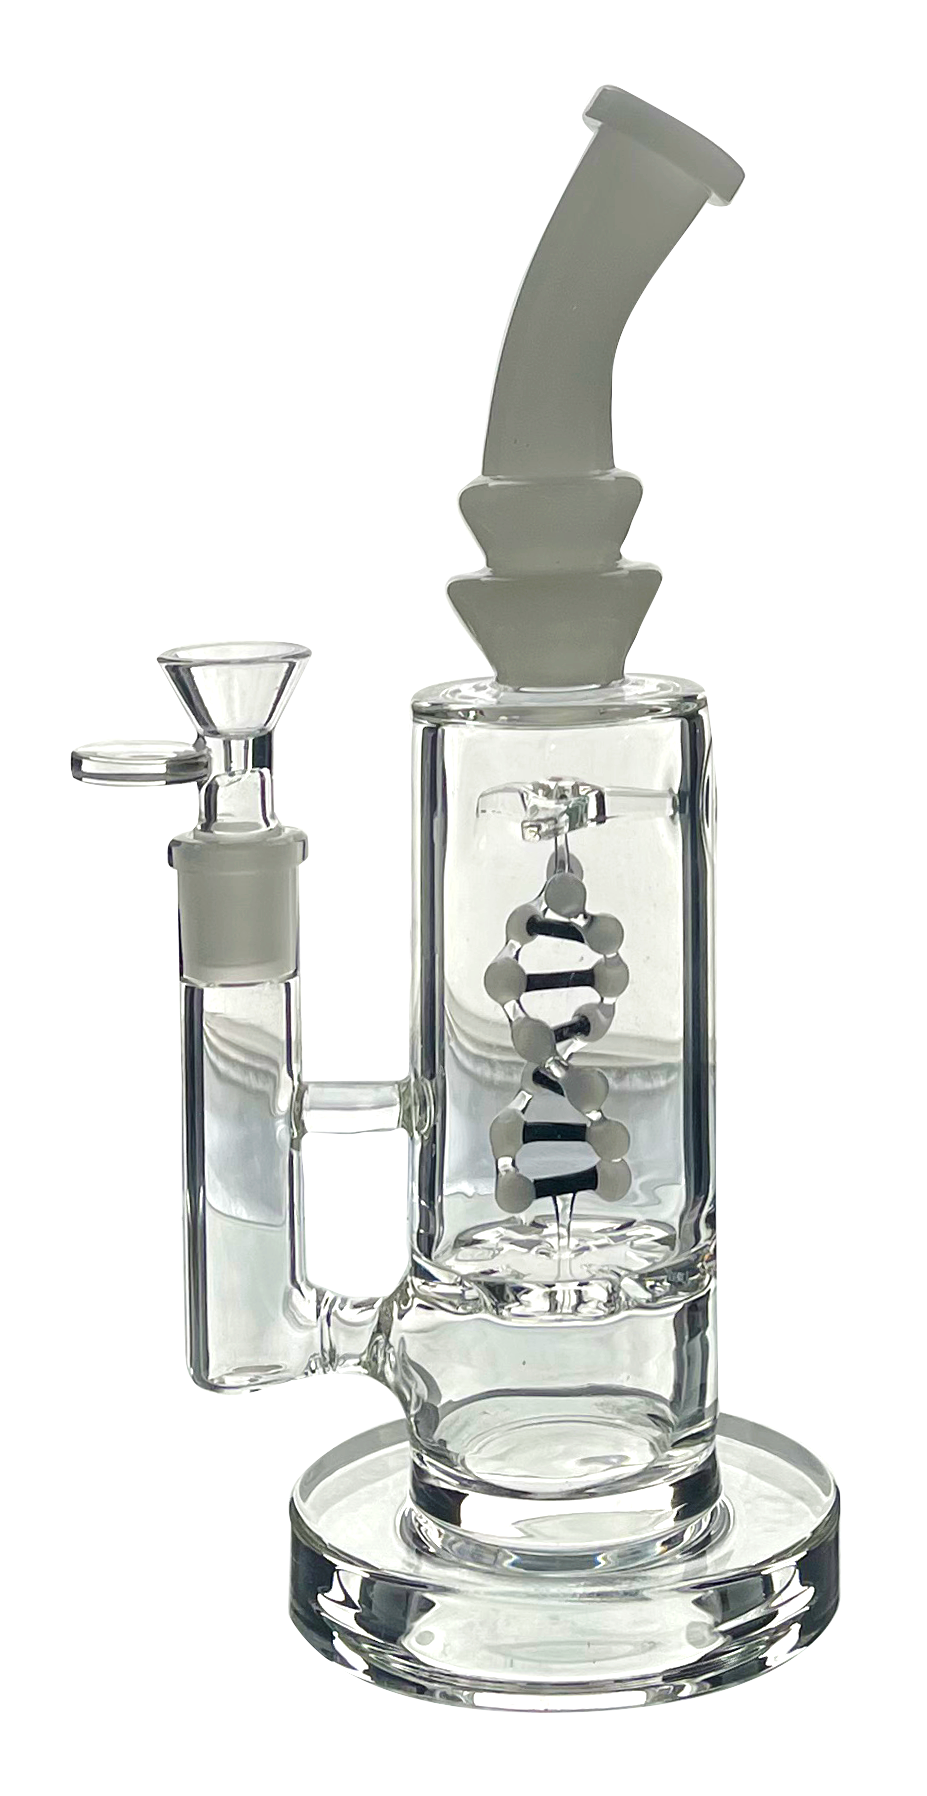 BEND COLOR MOUTHPIECE WITH TURBINE AND DNA PERC